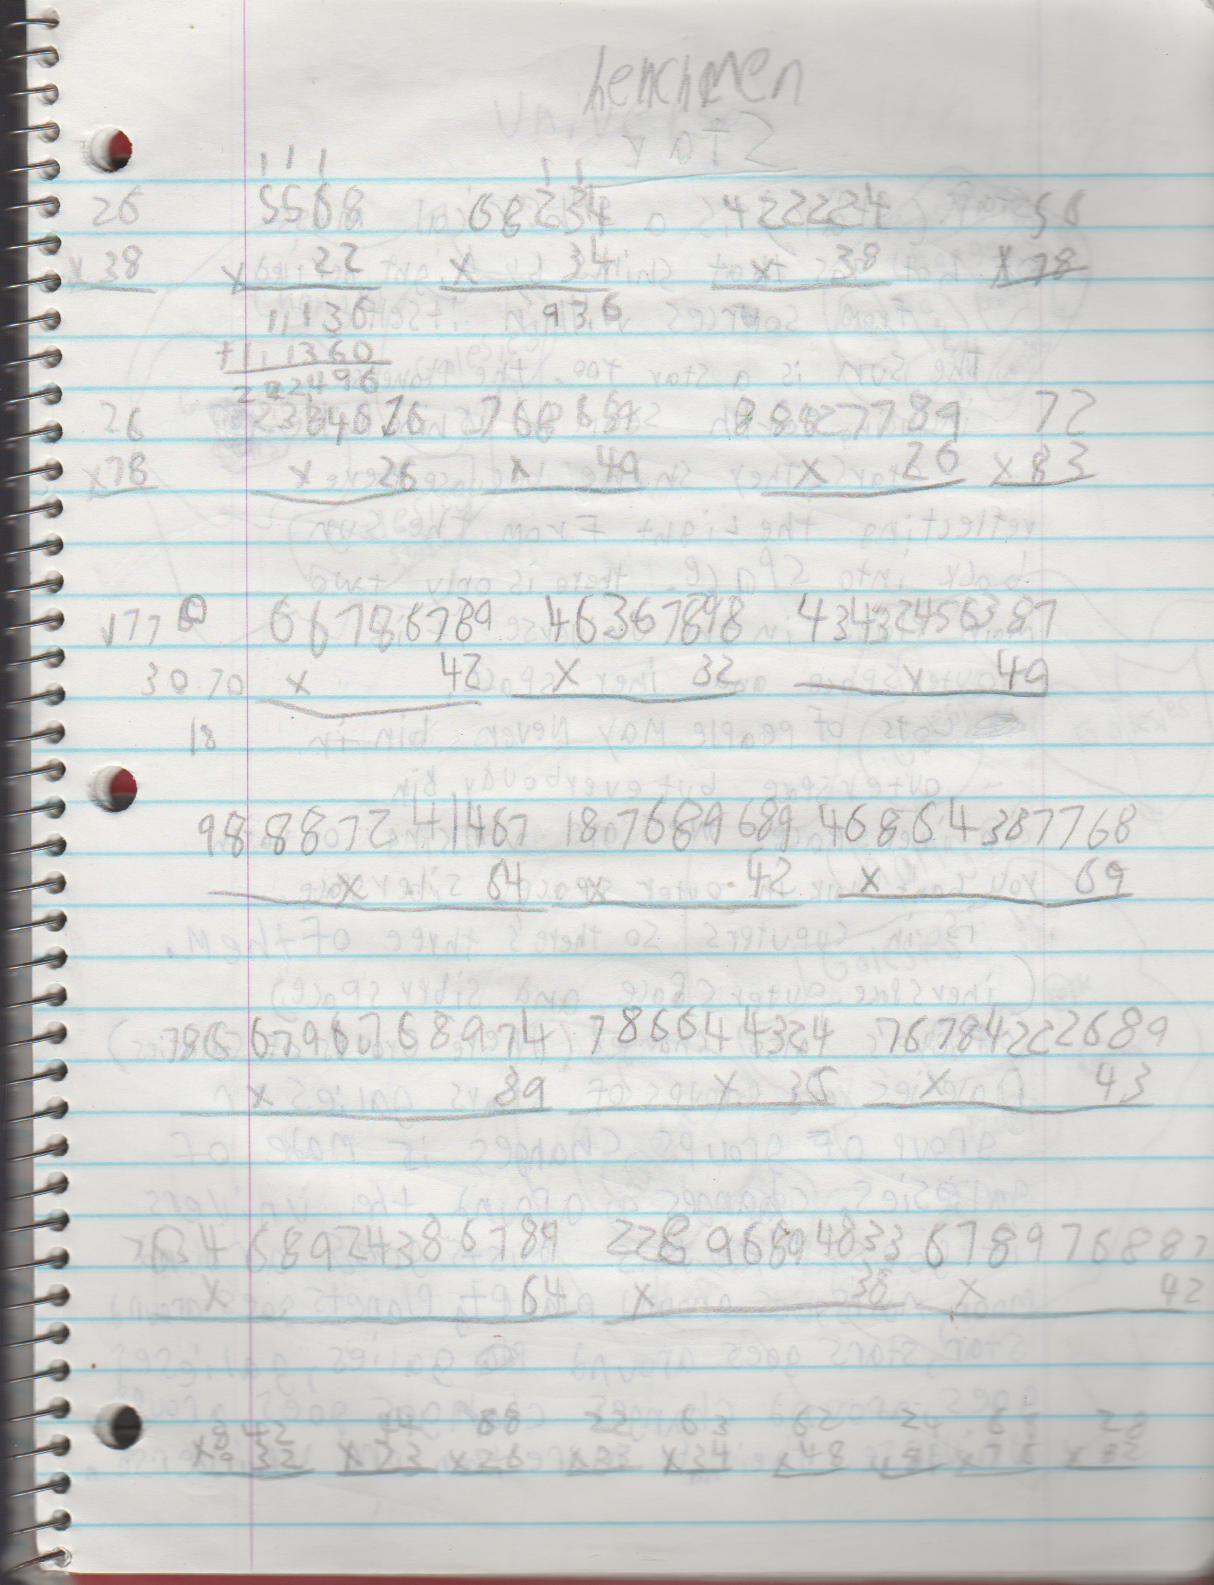 1996-08-18 - Saturday - 11 yr old Joey Arnold's School Book, dates through to 1998 apx, mostly 96, Writings, Drawings, Etc-027.png